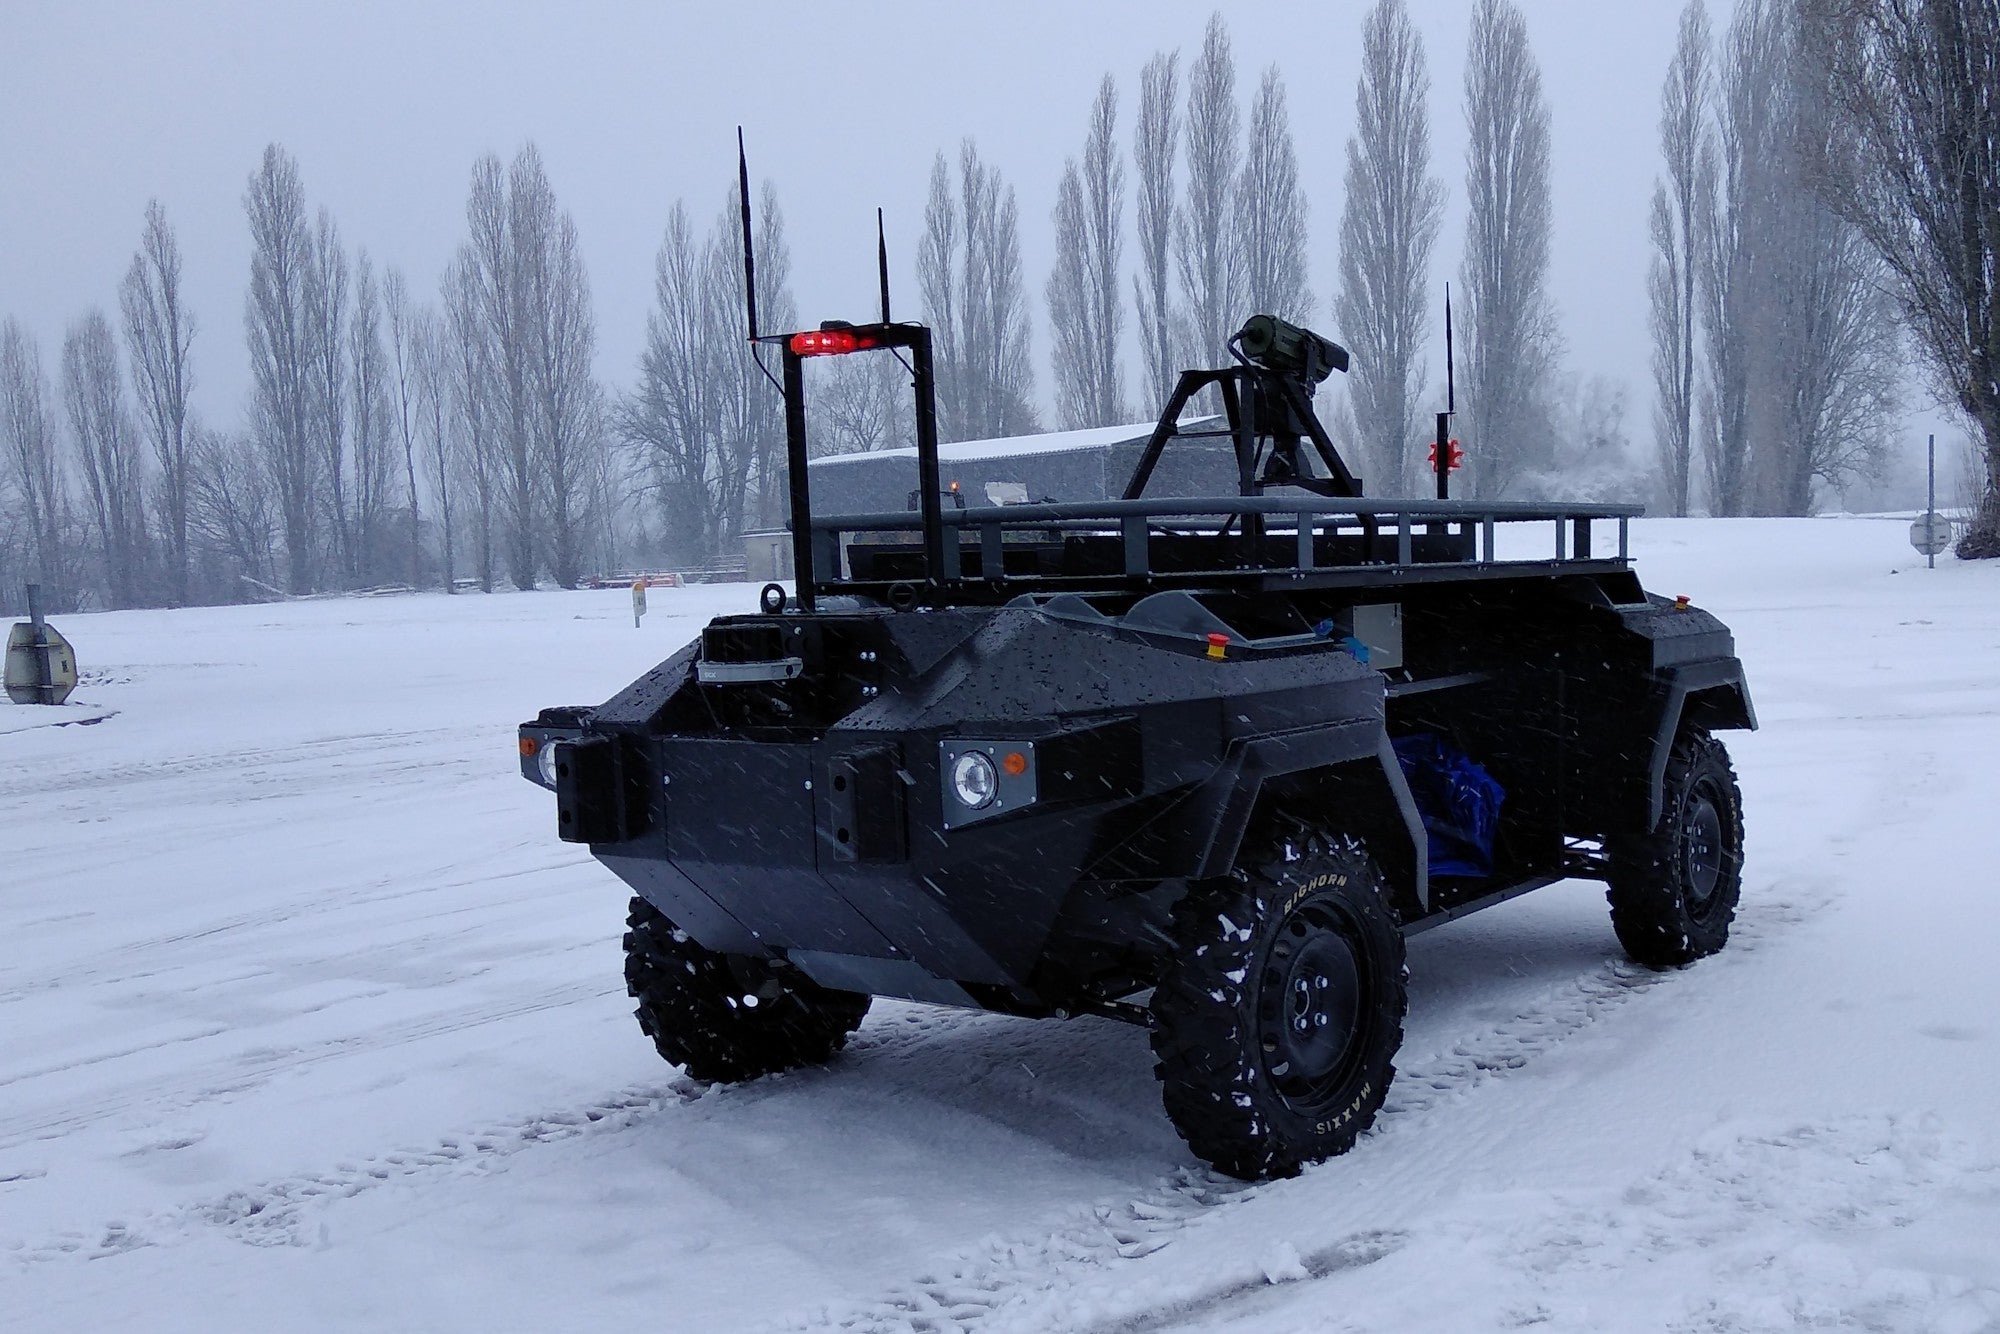 Meet Robbox, the robot that schleps a half-ton of supplies for special forces